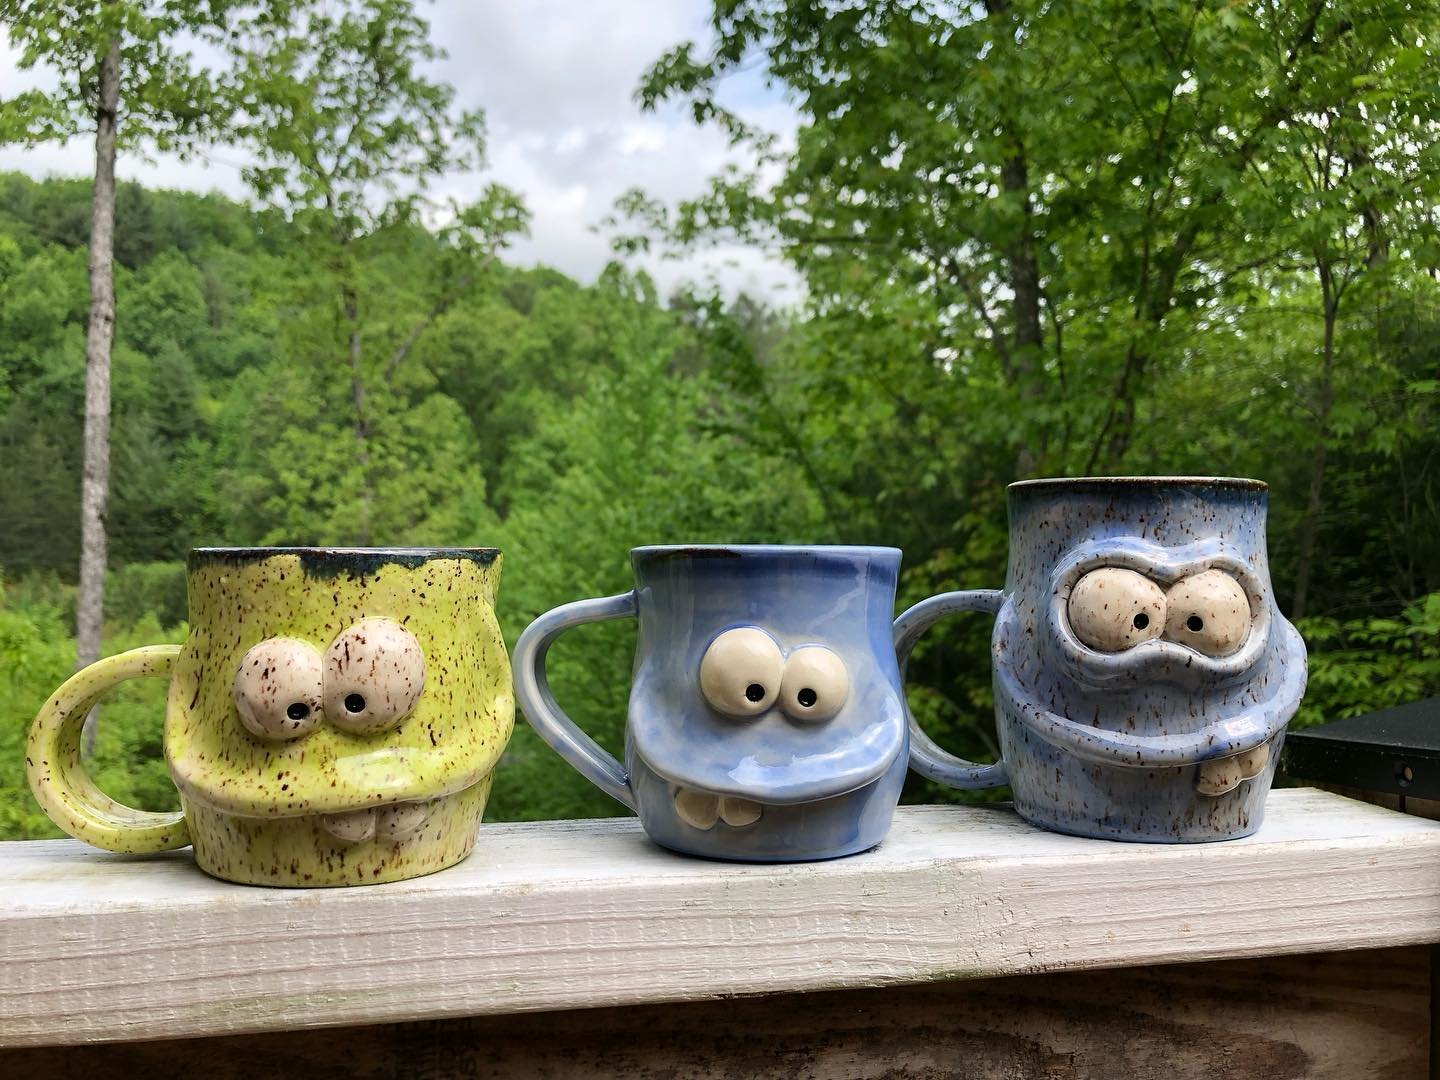 A few goofy faces headed to the Spring Southern Pottery Show this weekend (May 11) in Gillsville! 

A lot of pottery is trial and error. I learned several important lessons about speckled clay with these haha.

#pottery #handthrown #handsculpted #han